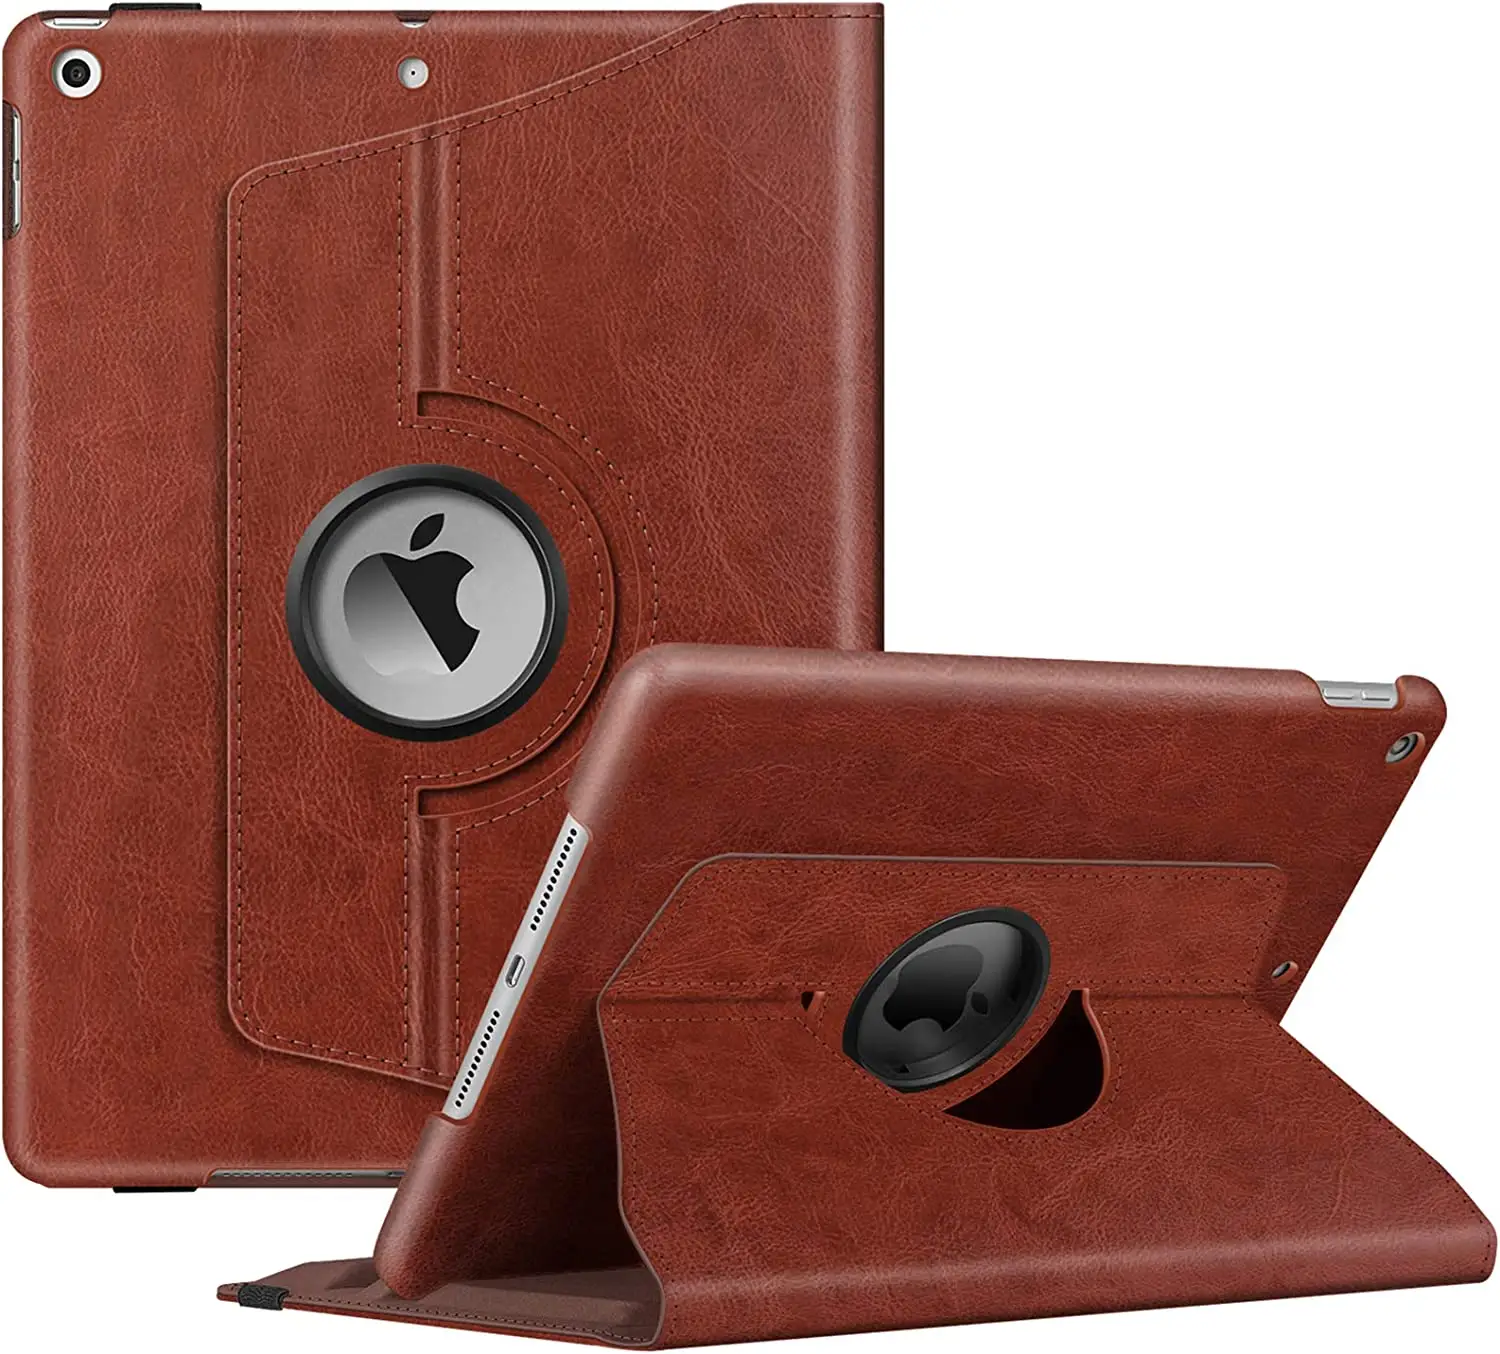 Rotating Case Premium PU Leather for Ipad 10.2'' 7th & 8th Generation - Stylish & Functional Opp Bag Tablet Leather Wallet Case